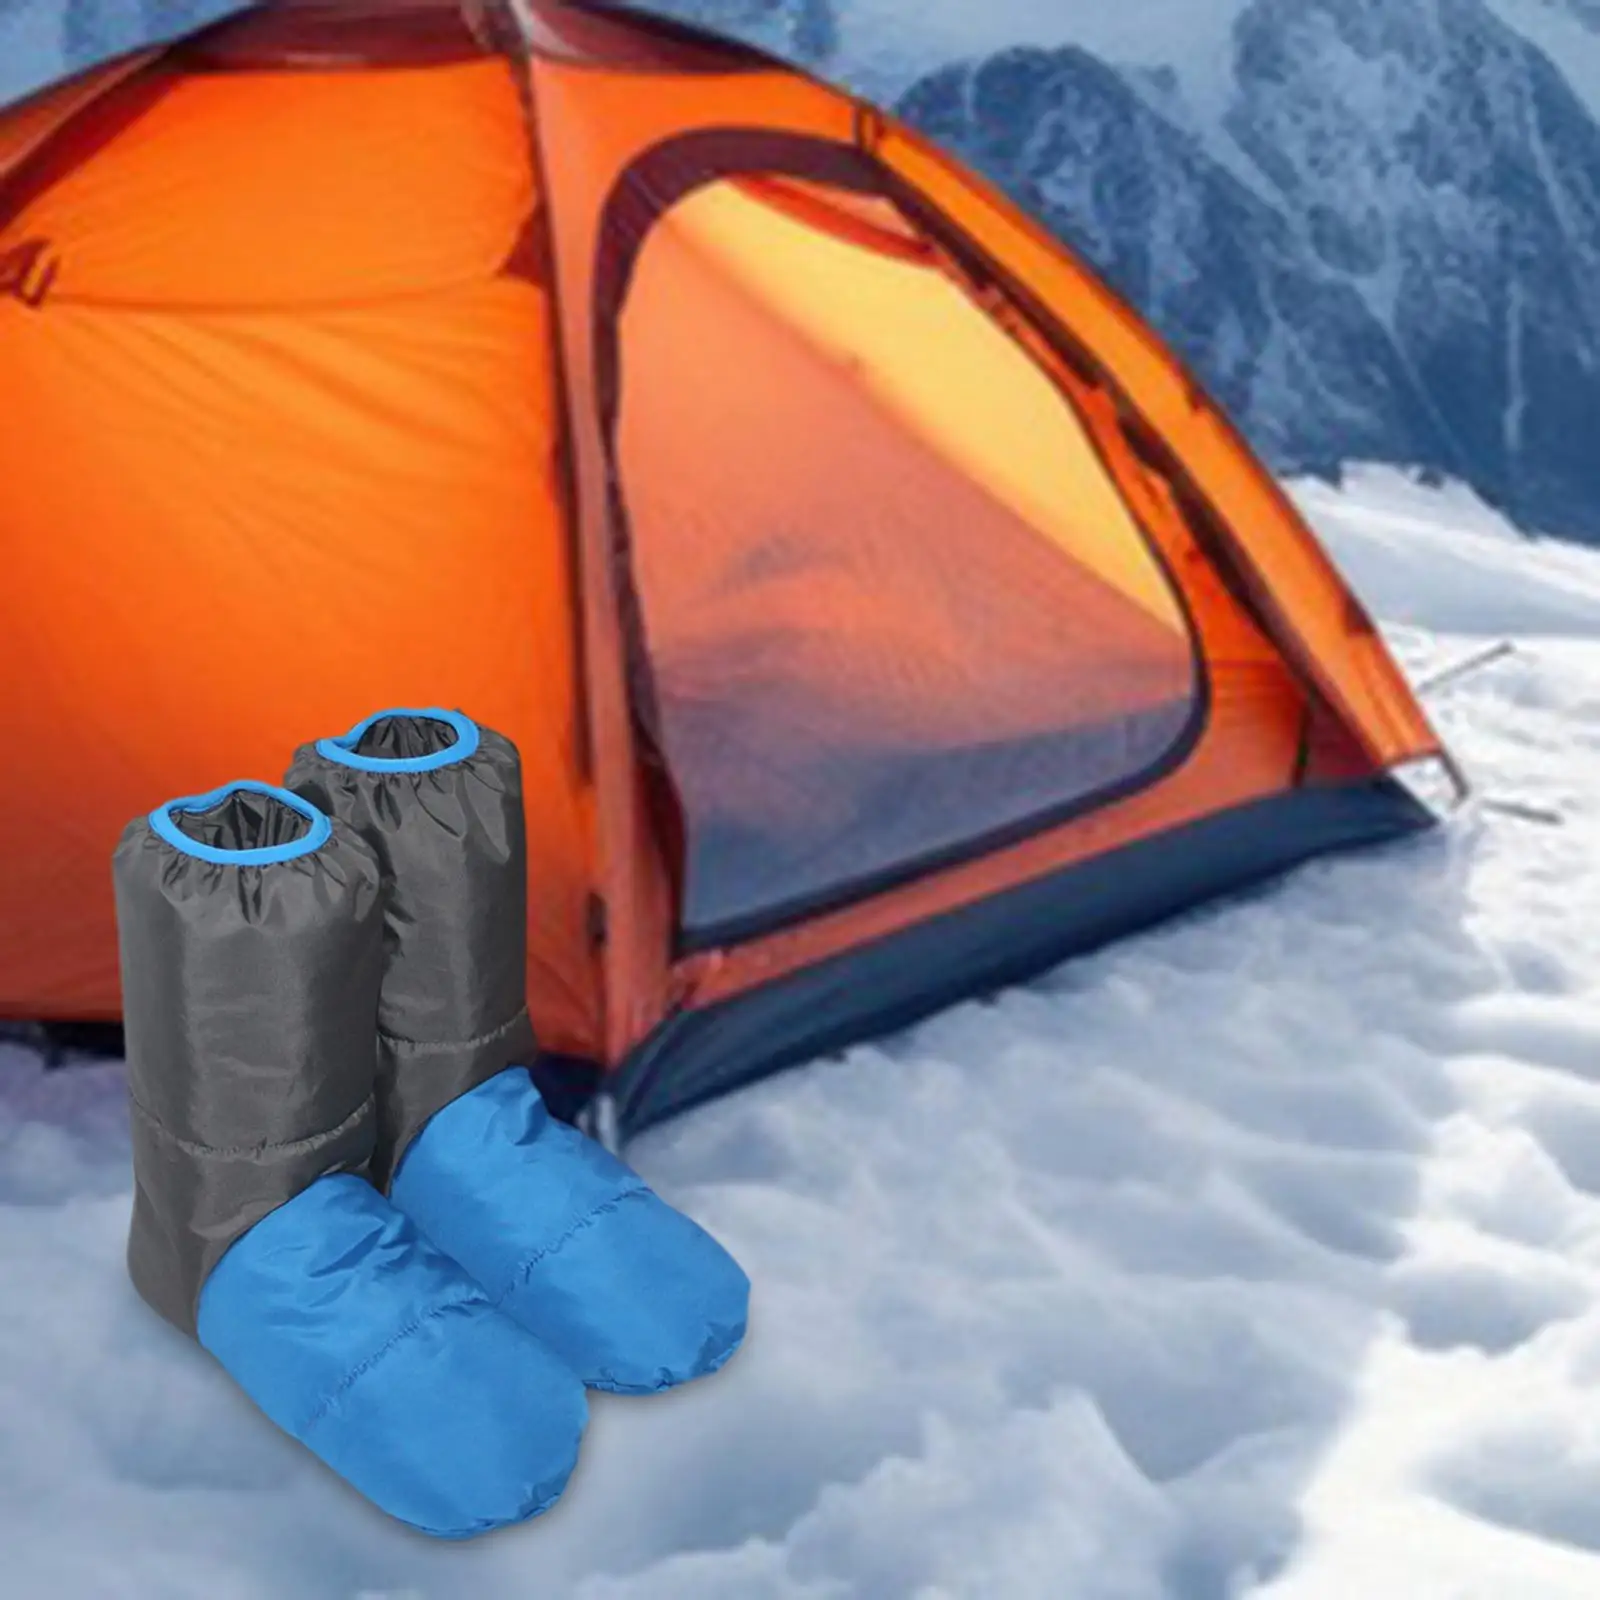 Down Booties Down Shoes Foot Socks Comfortable Ankle Snow Boots Insulated Warm Boots Warm Socks for Camping Indoor Home